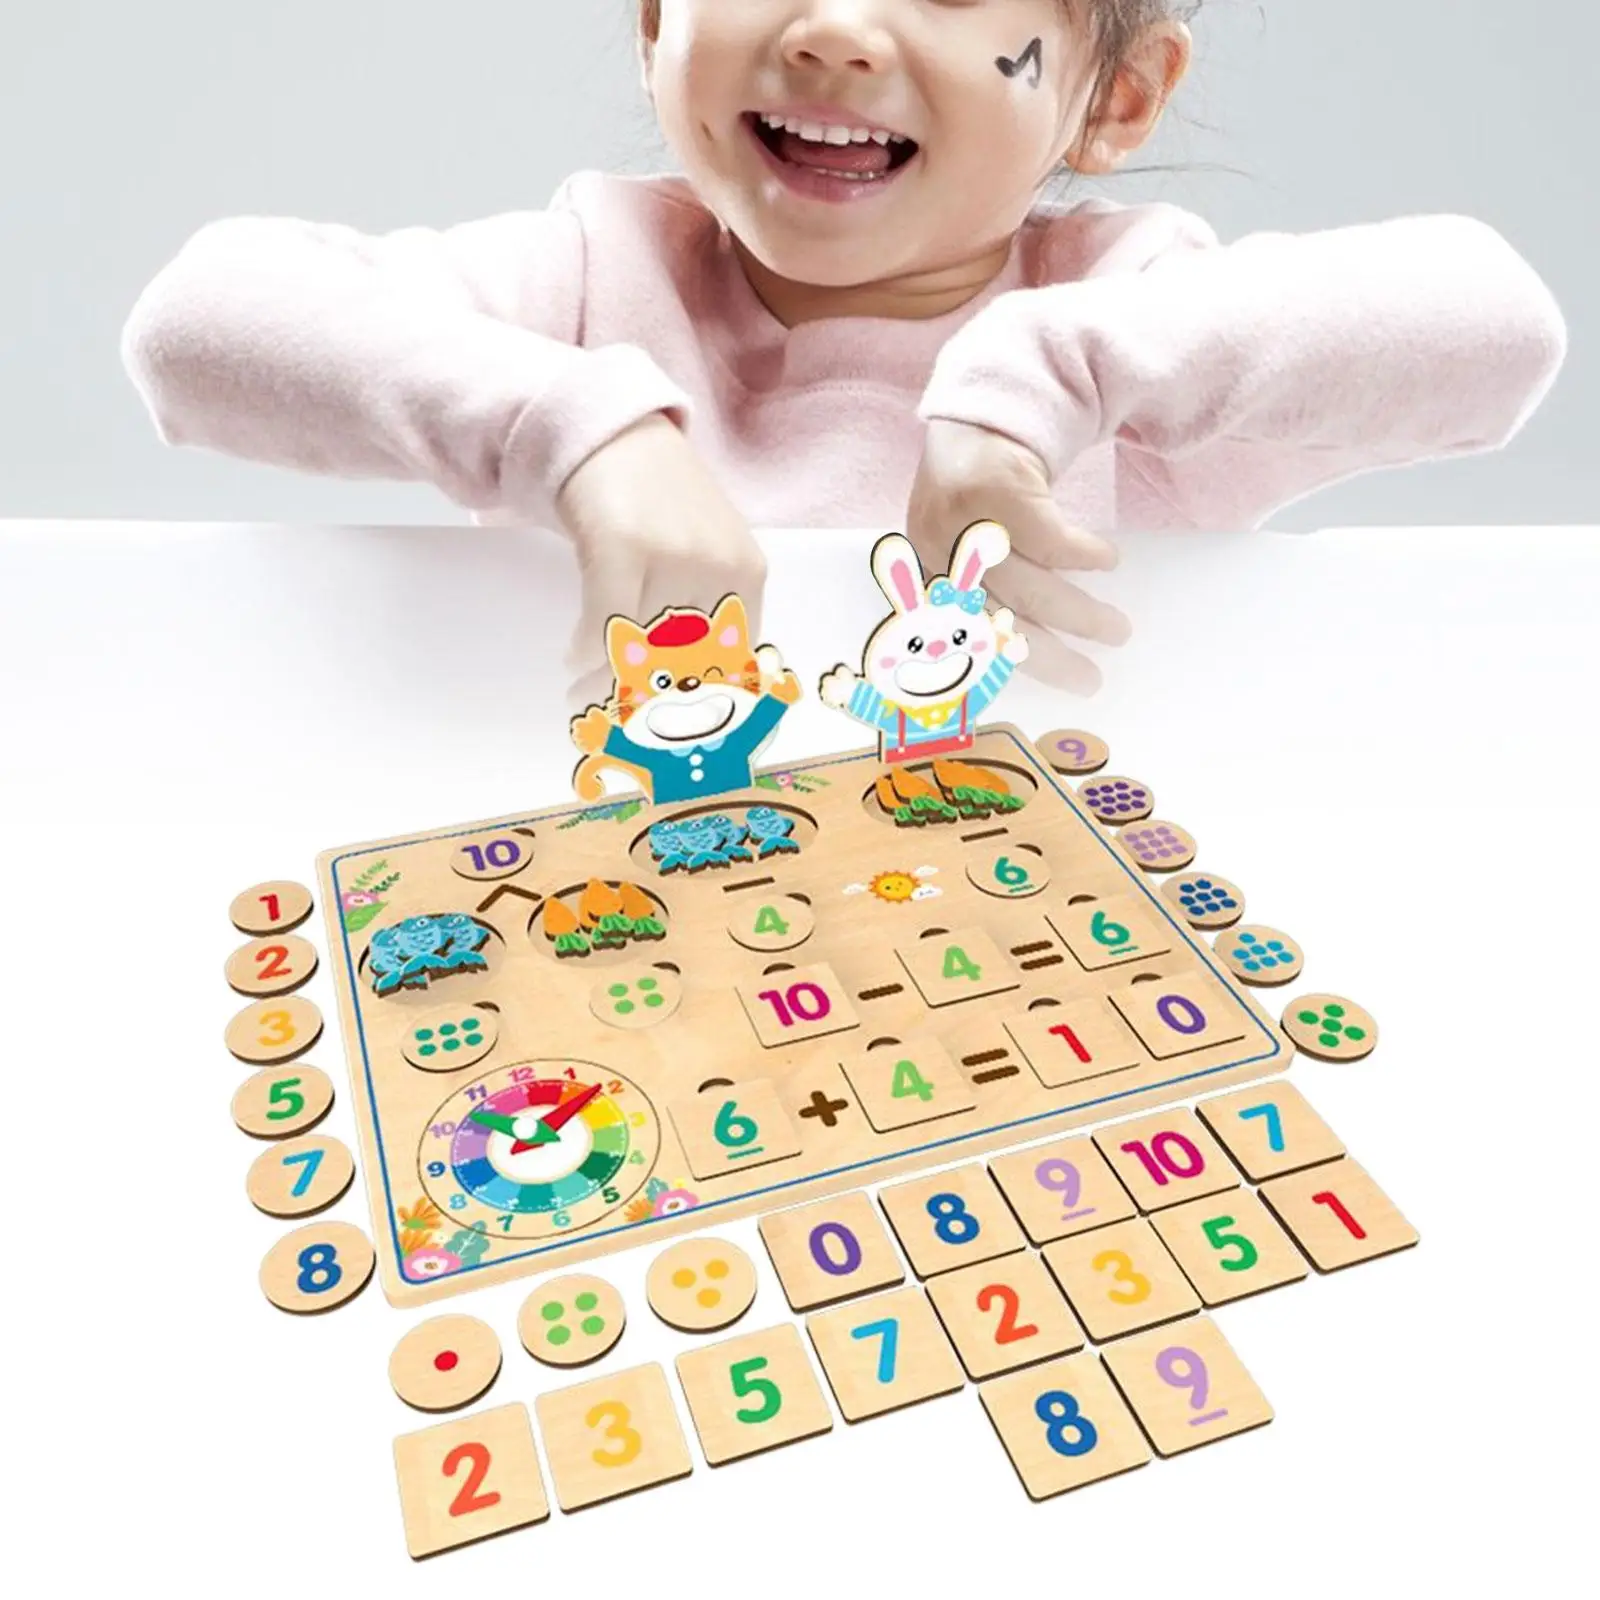 Preschool Wood Mathematical Learning Toy Calculation Board Made Premium Material Accessory Festival Gift Professional Durable